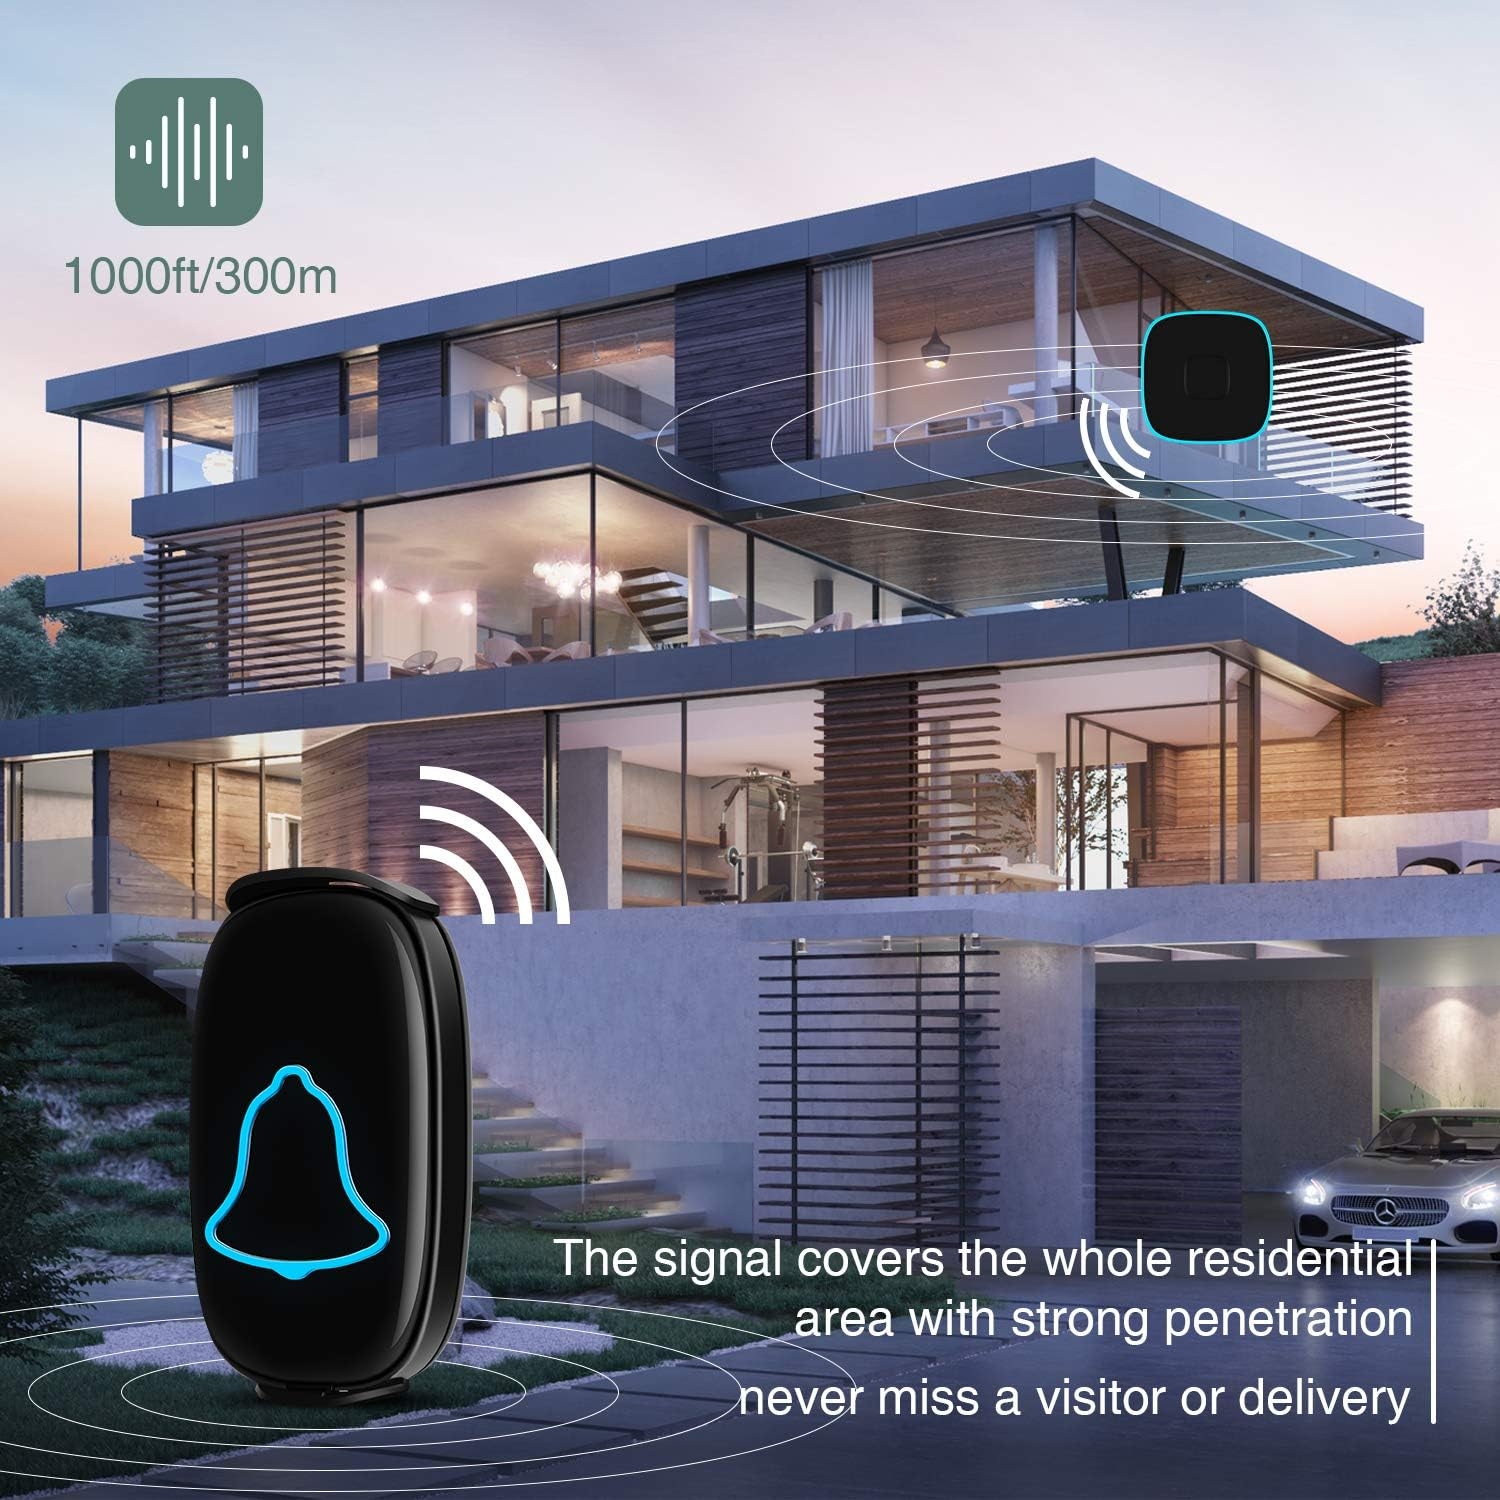 Wireless Doorbell, BO YING Waterproof Door Bell, Easy Install, Operating at 1000ft Range with 38 Melodies to Choose, Adjustable Volume and LED Flash,1 Push Button(Battery included)&1 Receiver,Black